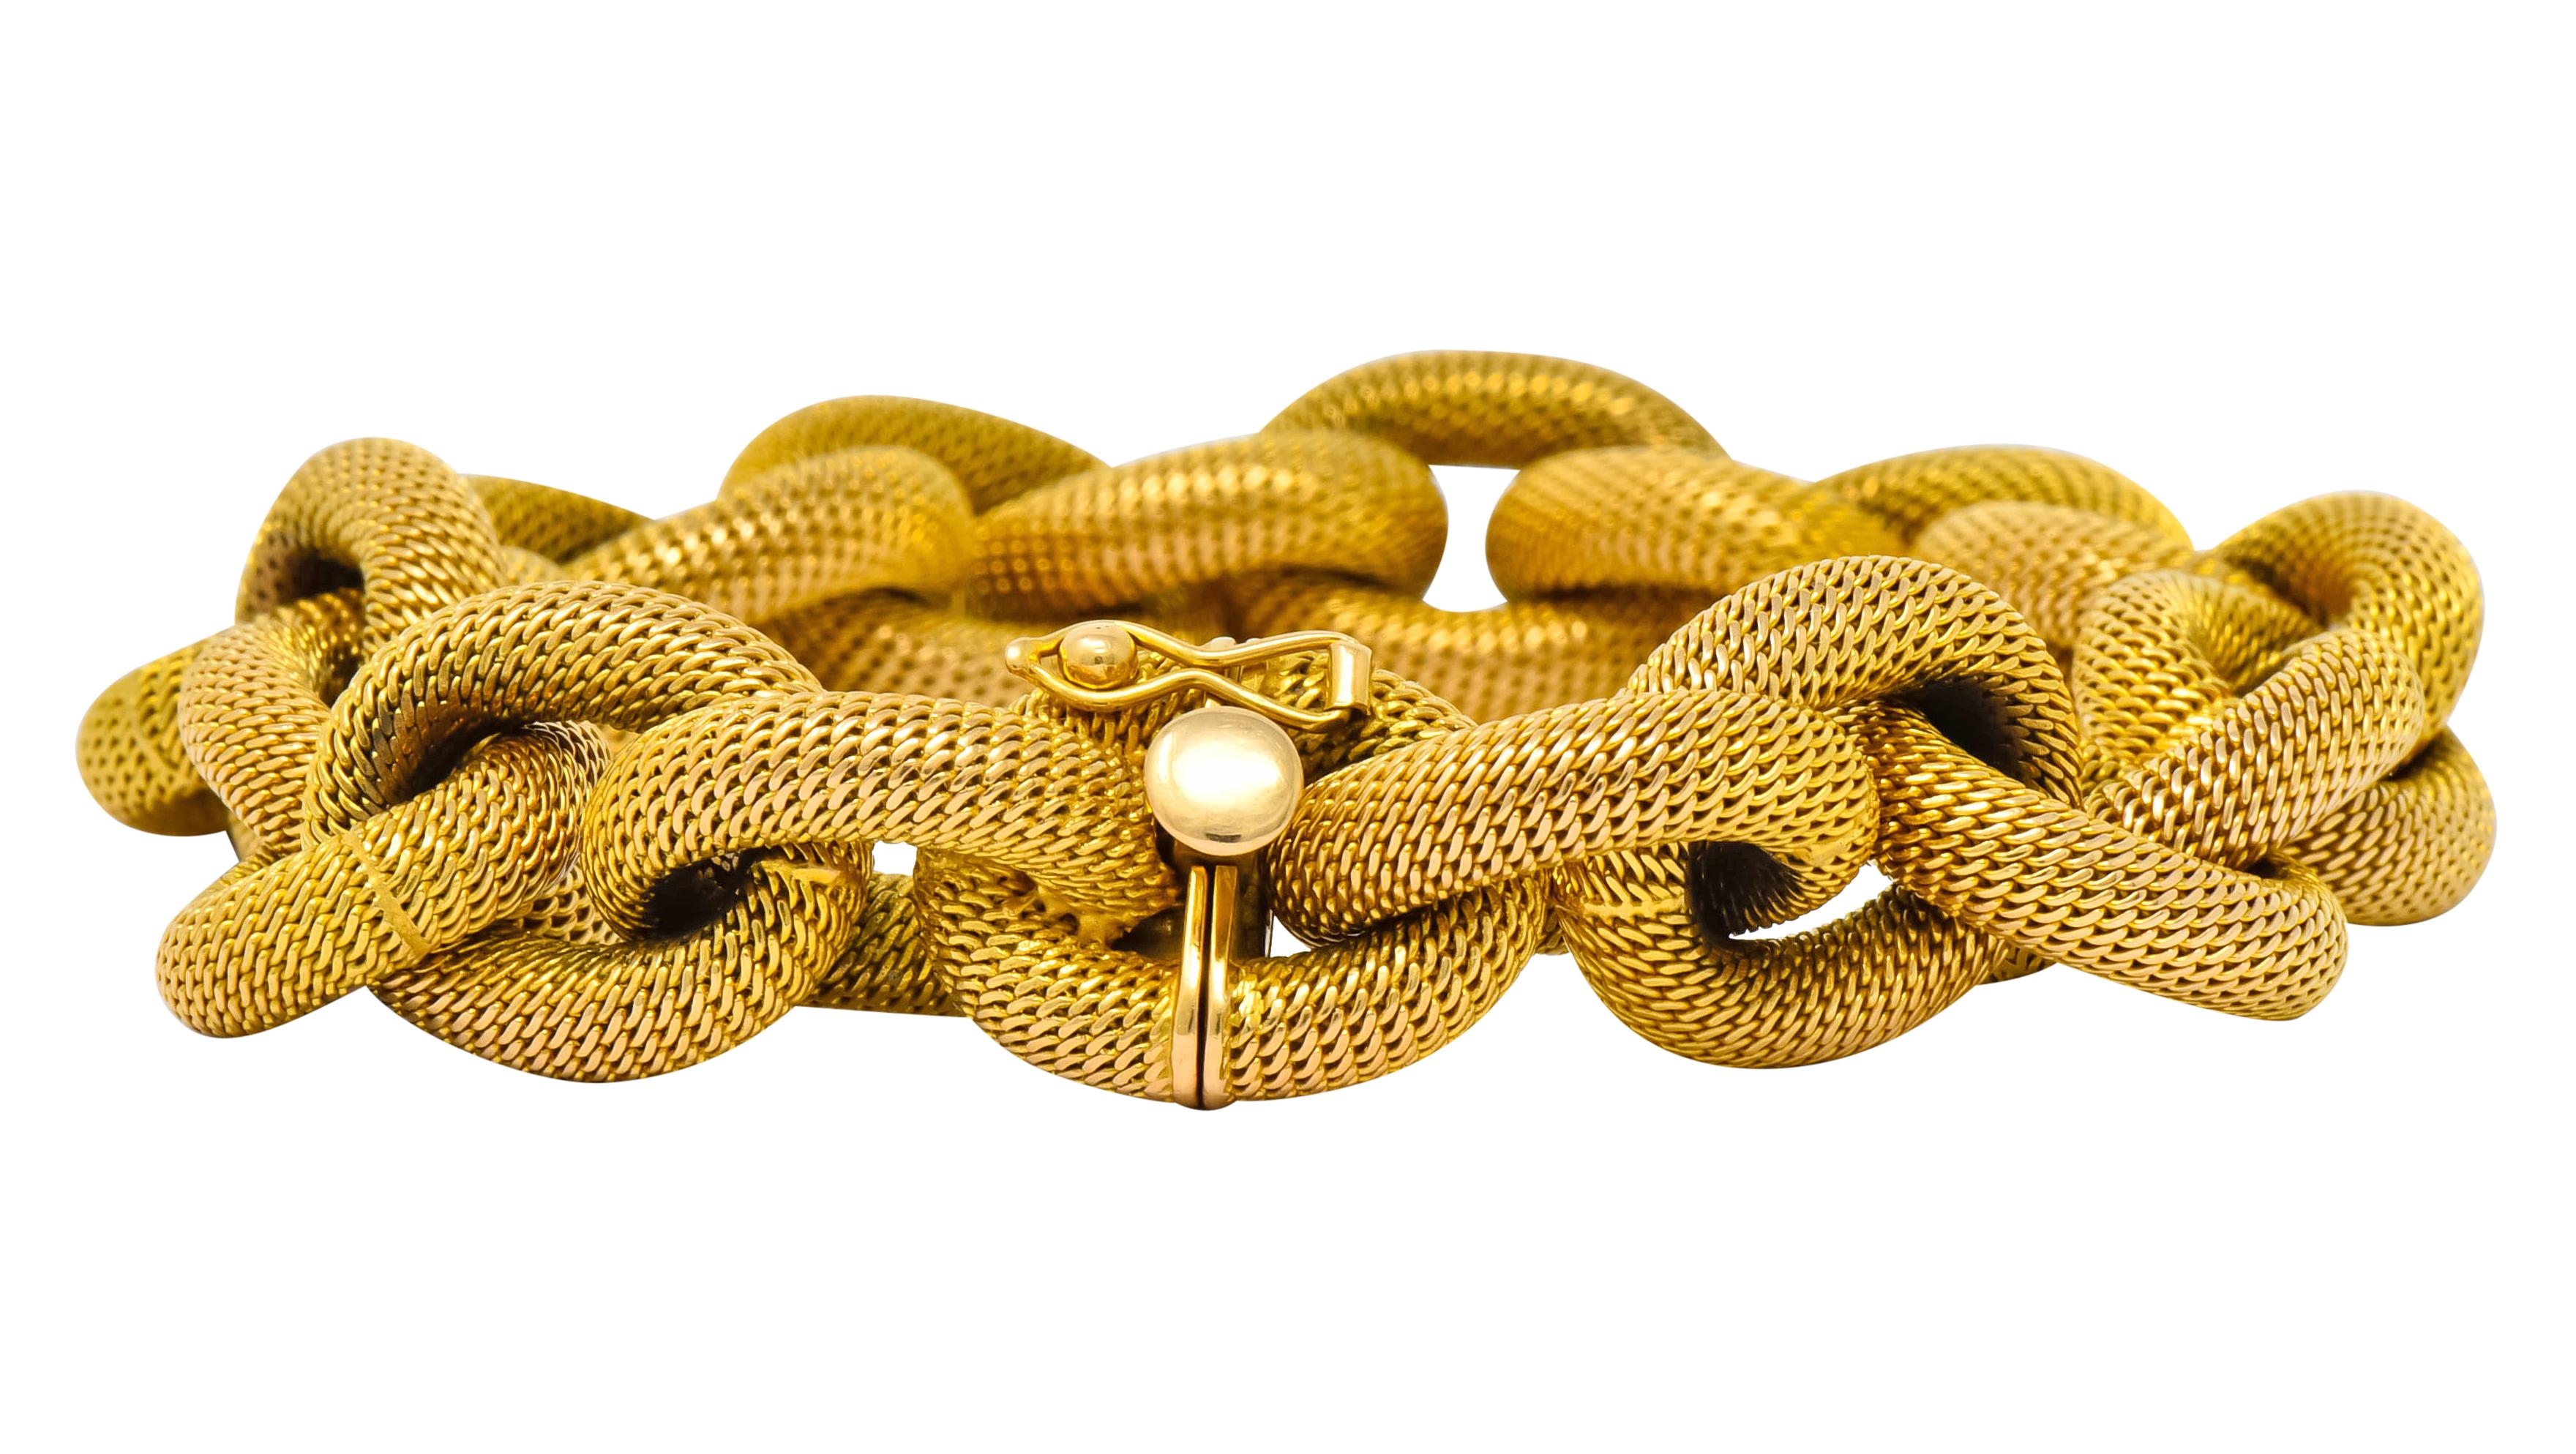 Link style bracelet comprised of large, hollow, mesh links

With a matte gold textured finish

Completed by concealed clasp and figure eight safety

With maker's mark and assay mark for Verona Italy

Stamped 750 for 18 karat gold

Circa